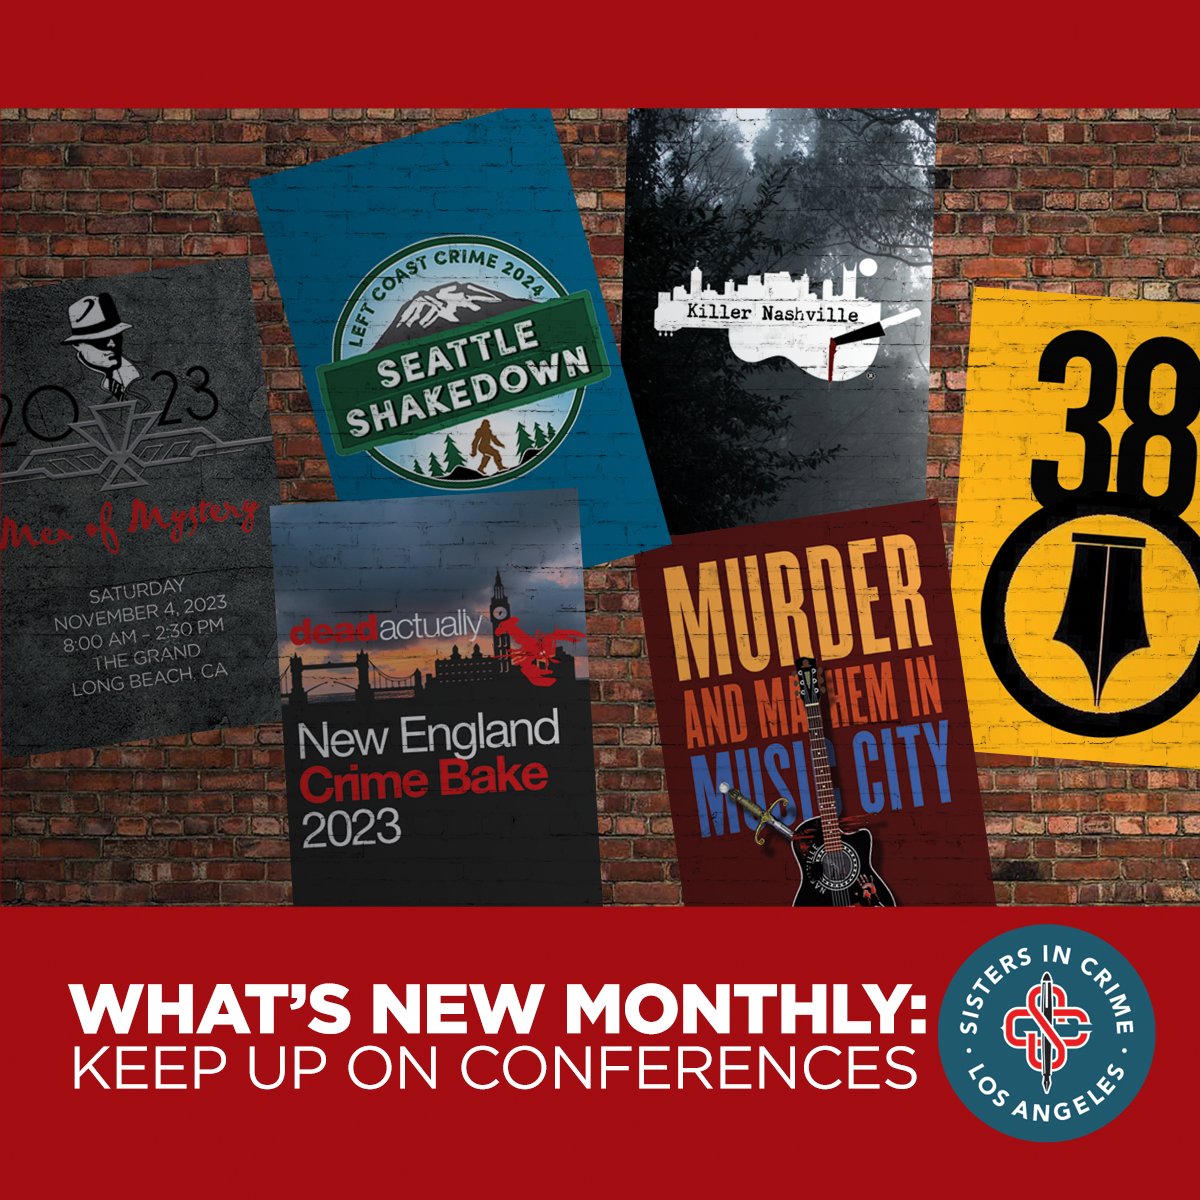 Never miss a registration deadline for a great crime and mystery conference. Our What’s New newsletter is free and in your inbox at the beginning of every month. Sign up at the bottom of our home page: sistersincrimela.com